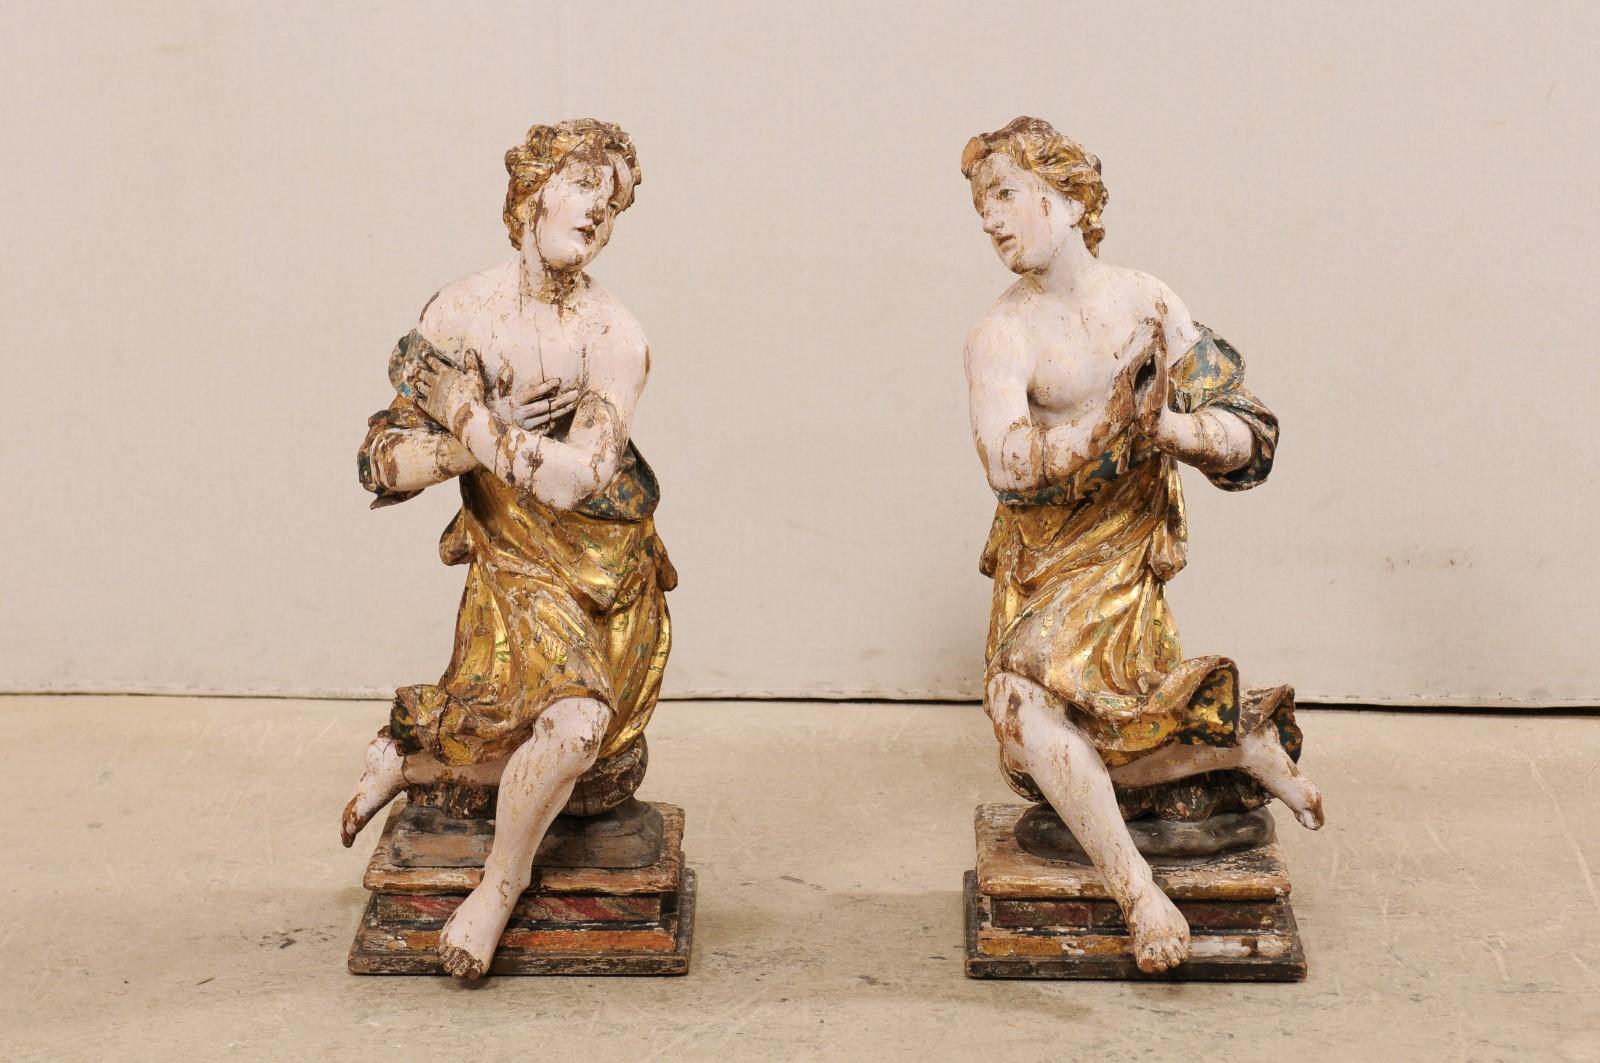 An exquisite Italian pair of carved and giltwood angelic male figures from the early 18th century. This pair of antique statues from Italy each feature a beautifully carved male figure, each draped within a gilt robe, with shoulders, arms, legs